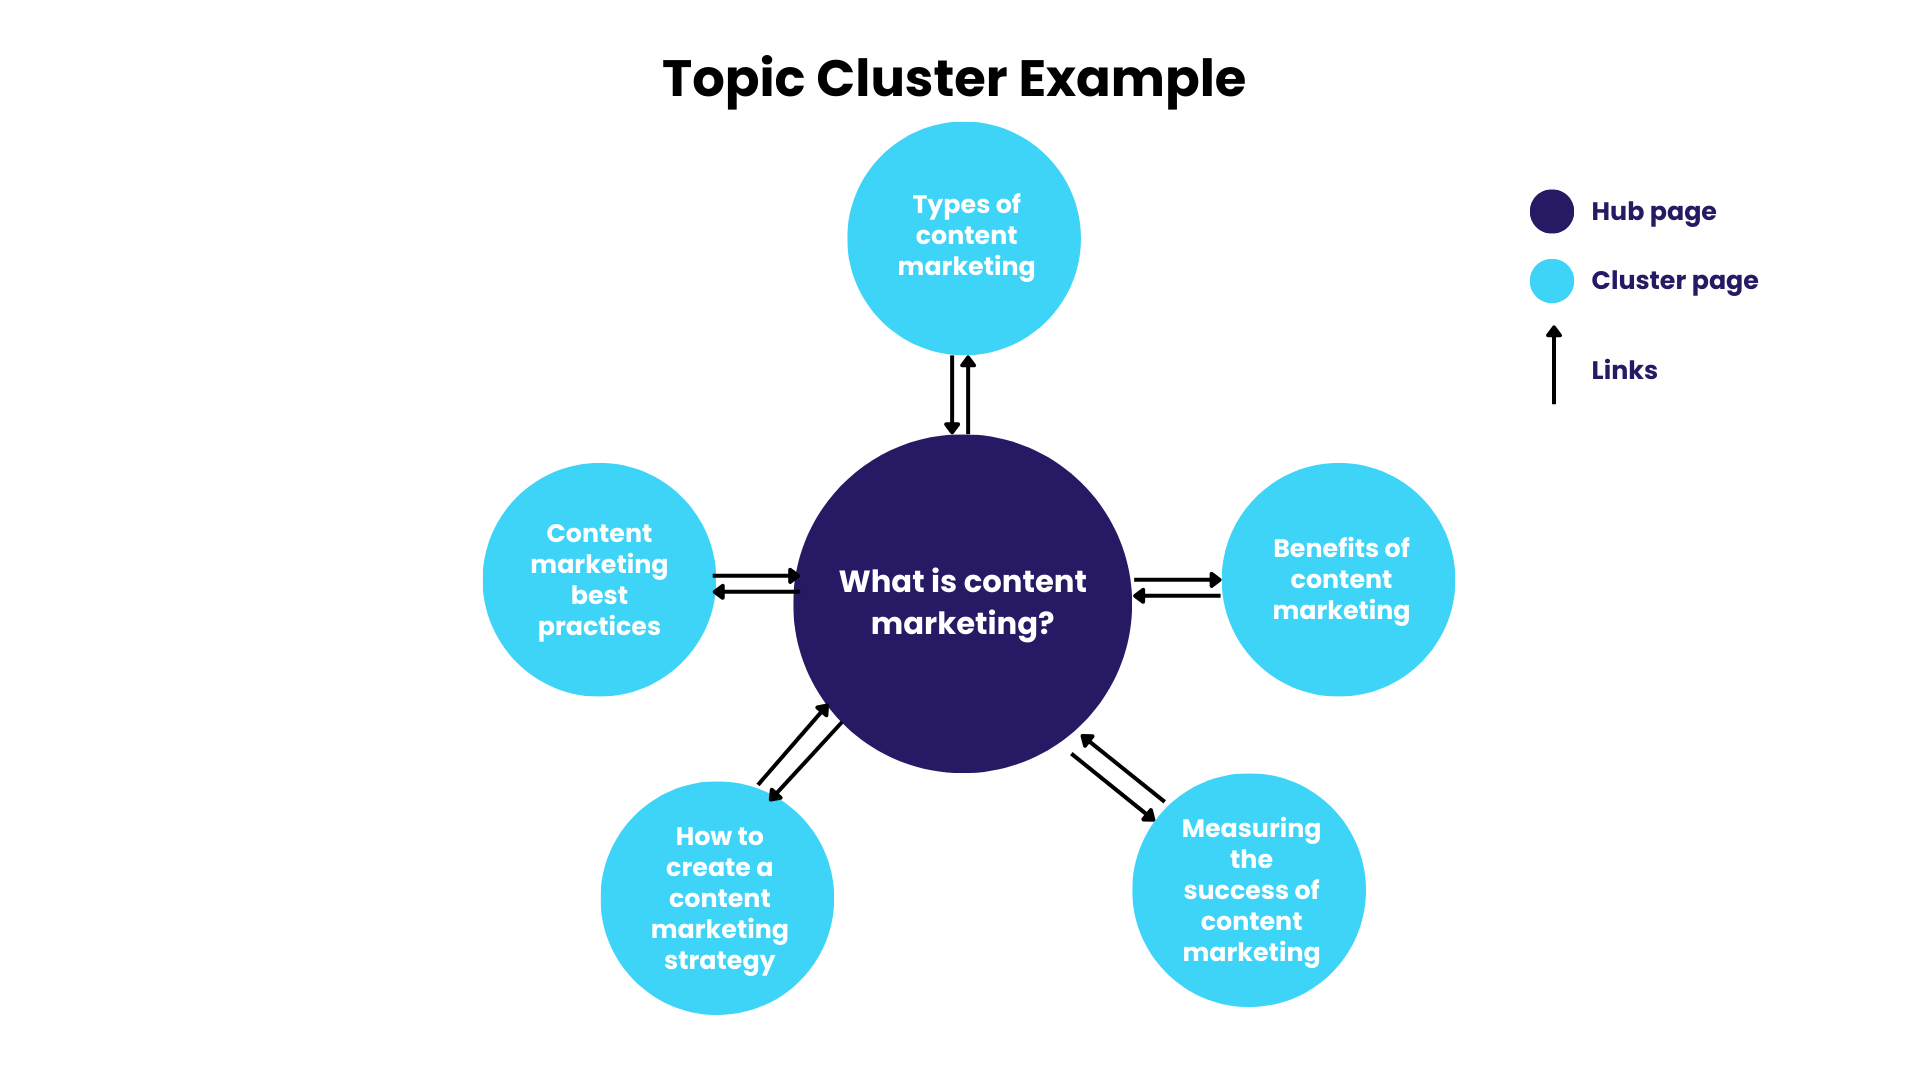 Topic cluster examples_Oncrawl